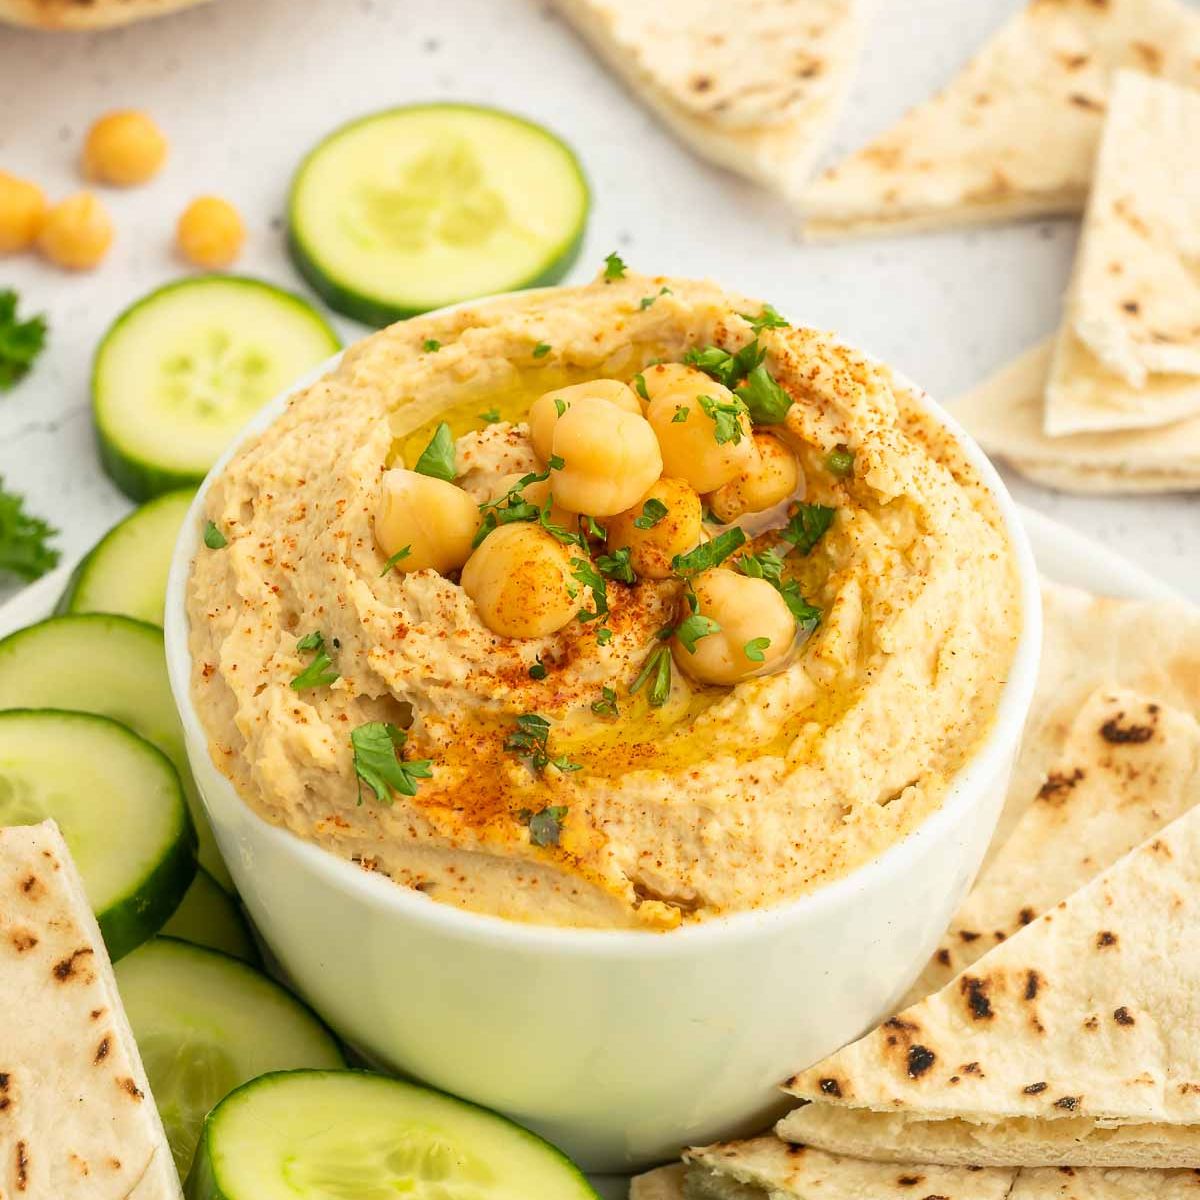 A bowl of oil-free hummus garnished with chickpeas.